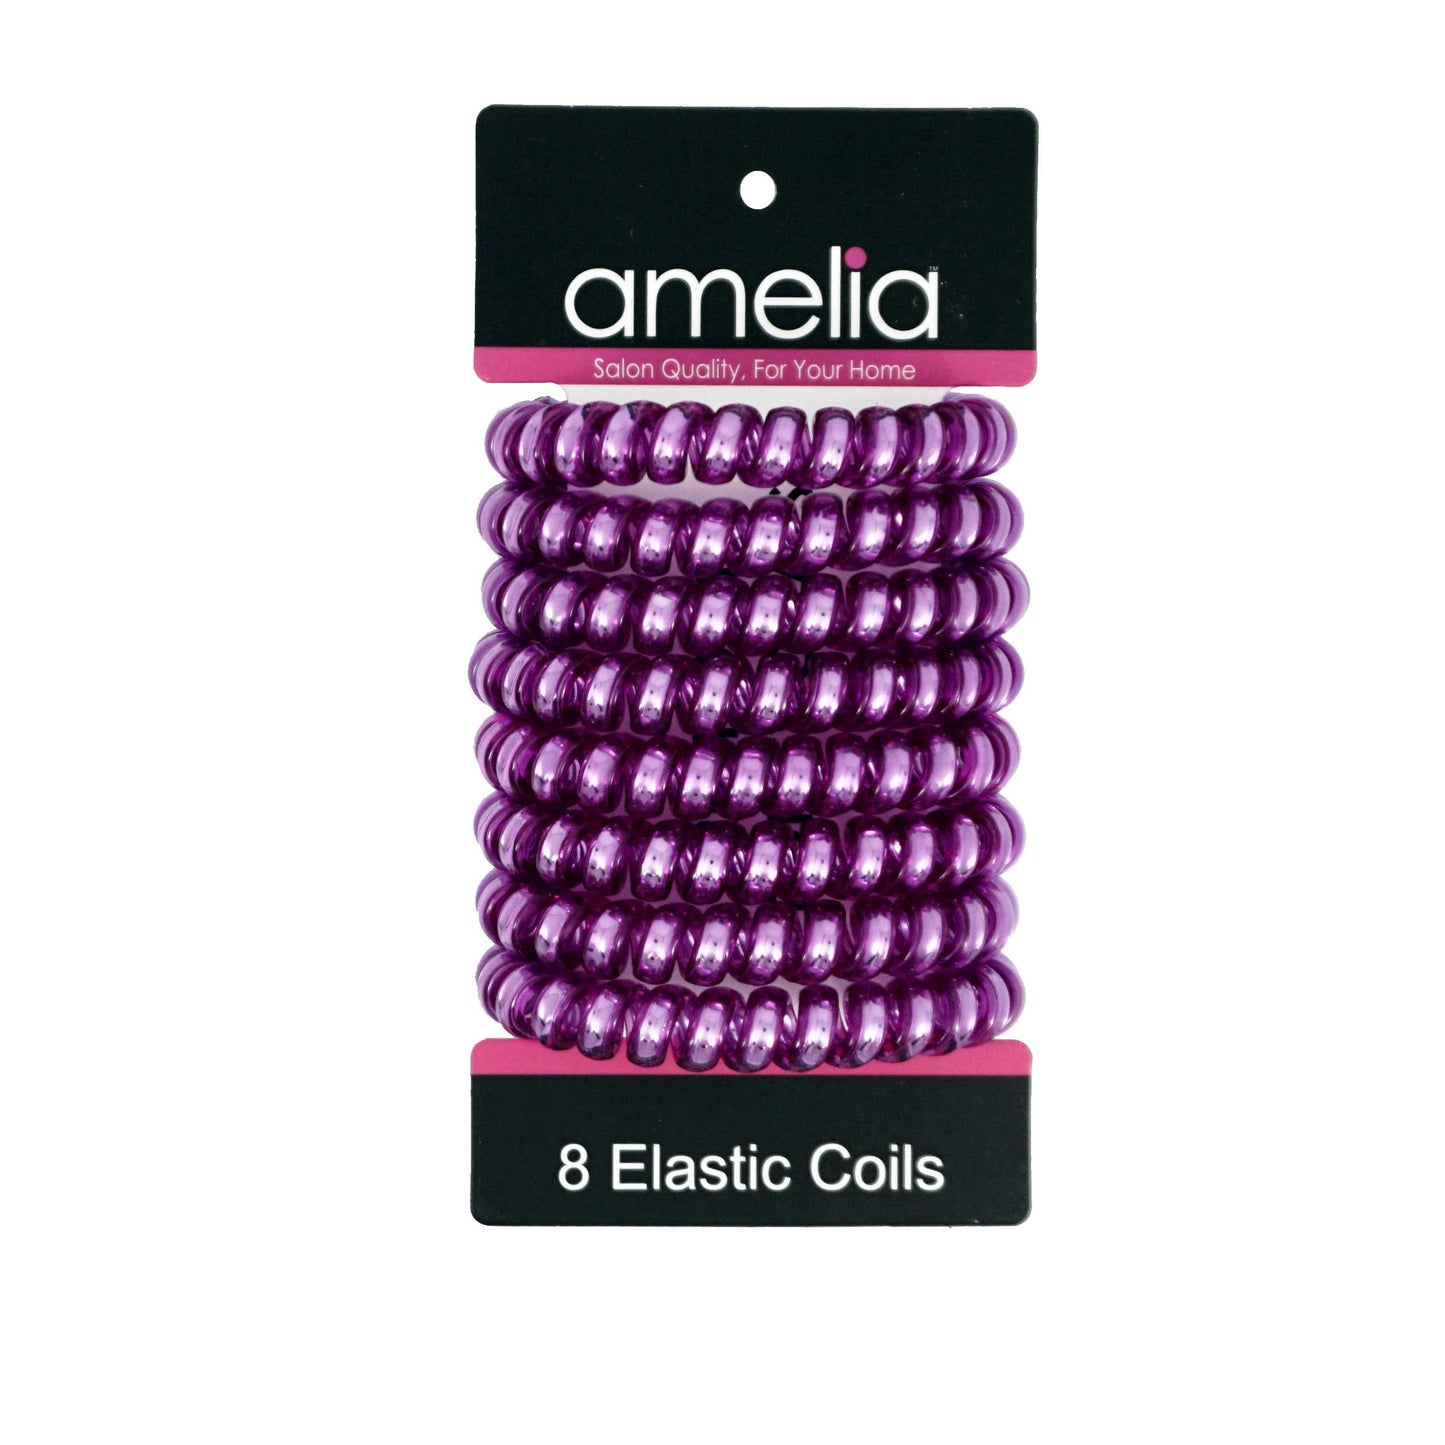 Amelia Beauty Products 8 Large Smooth Shiny Center Elastic Hair Coils, 2. 5in Diameter Thick Spiral Hair Ties, Gentle on Hair, Strong Hold and Minimizes Dents and Creases, Purple